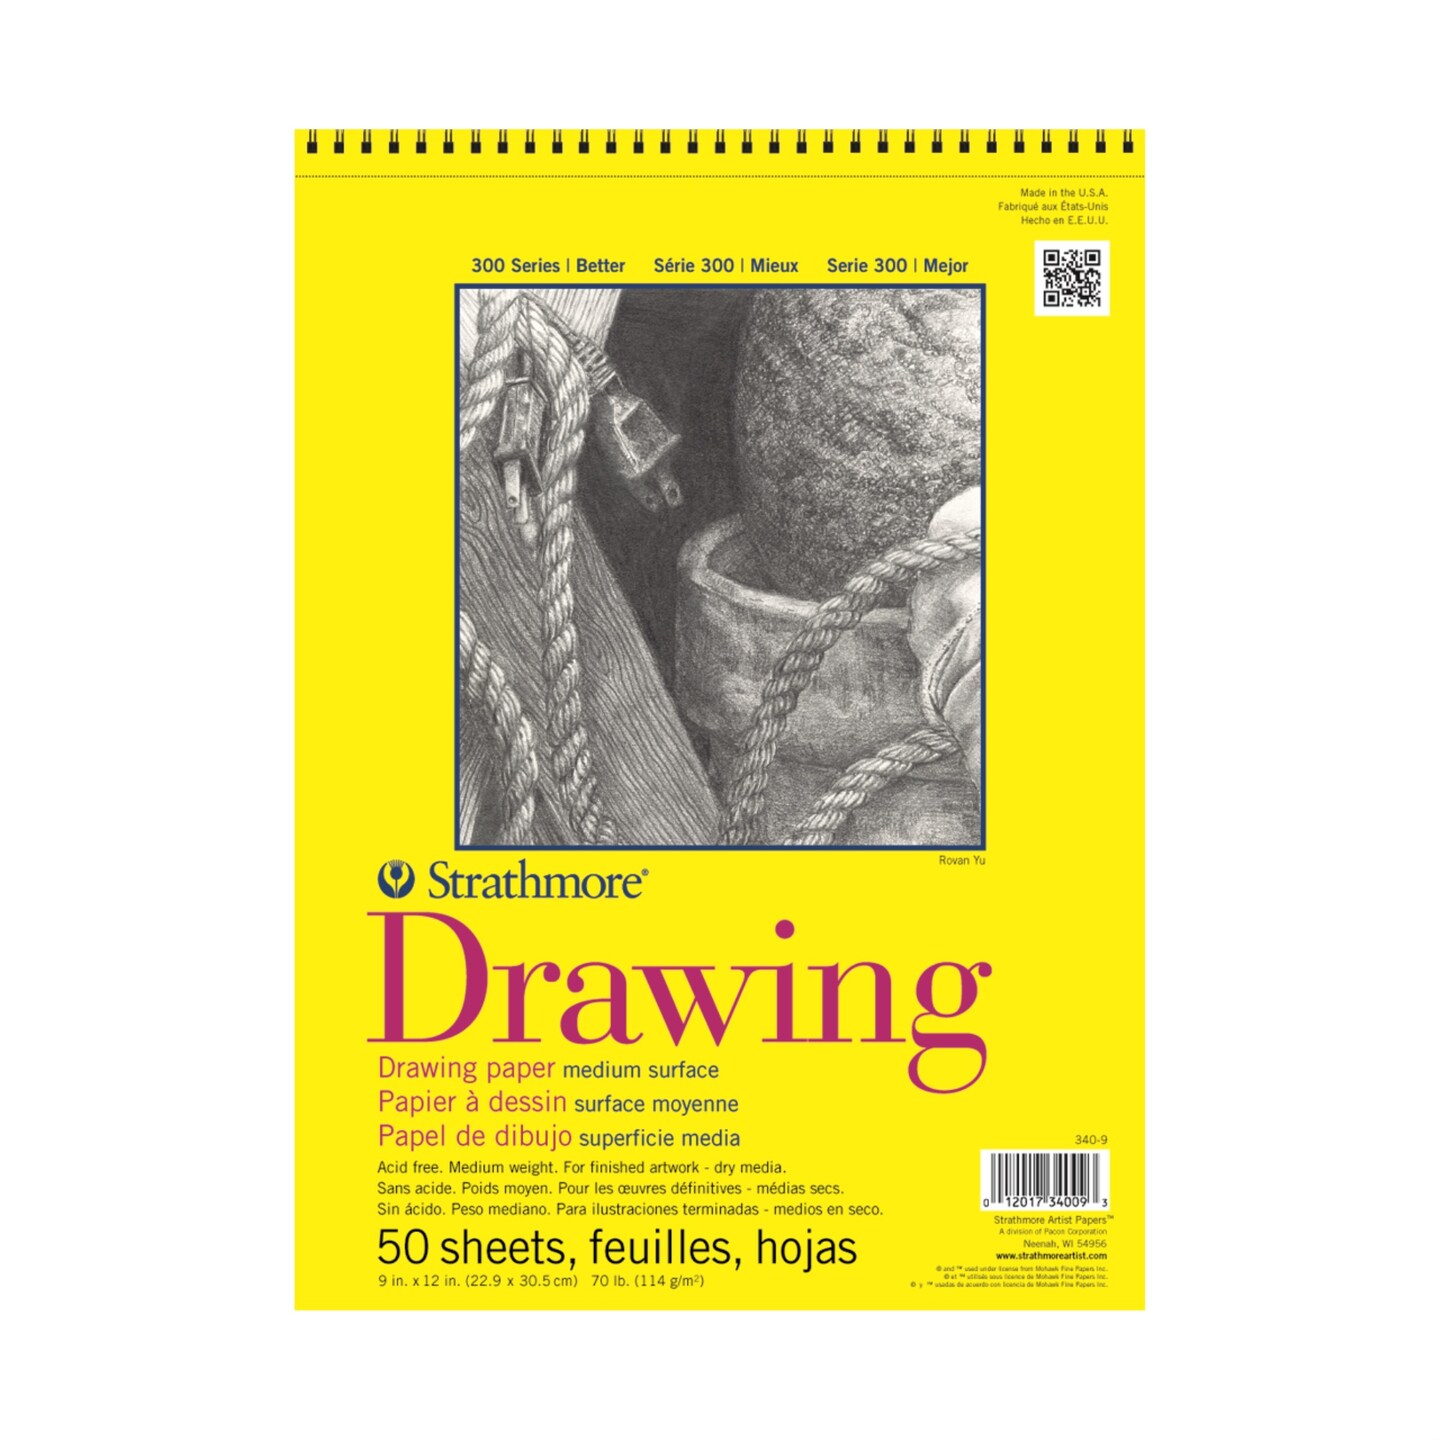 Strathmore 300 Series Drawing Paper Pad, Top Wire Bound, 11x14 inches, 50 Sheets (70lb/114g) - Artist Paper for Adults and Students - Charcoal, Colored Pencil, Ink, Pastel, Marker